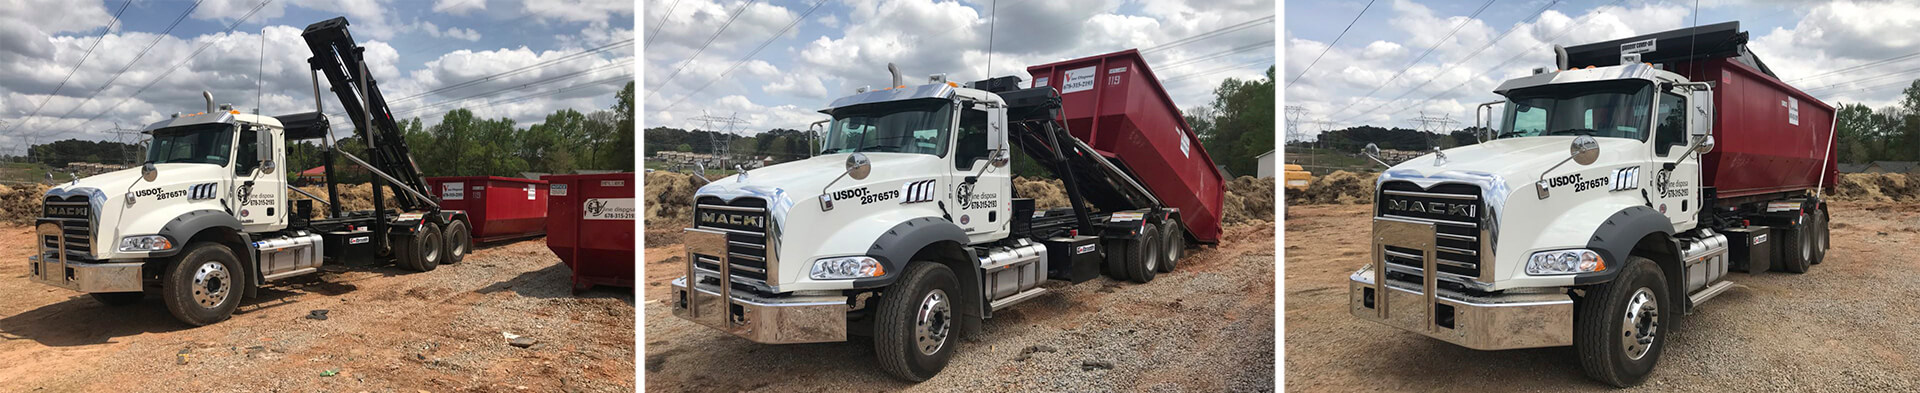 Dumpster Rental Services in Canton, GA